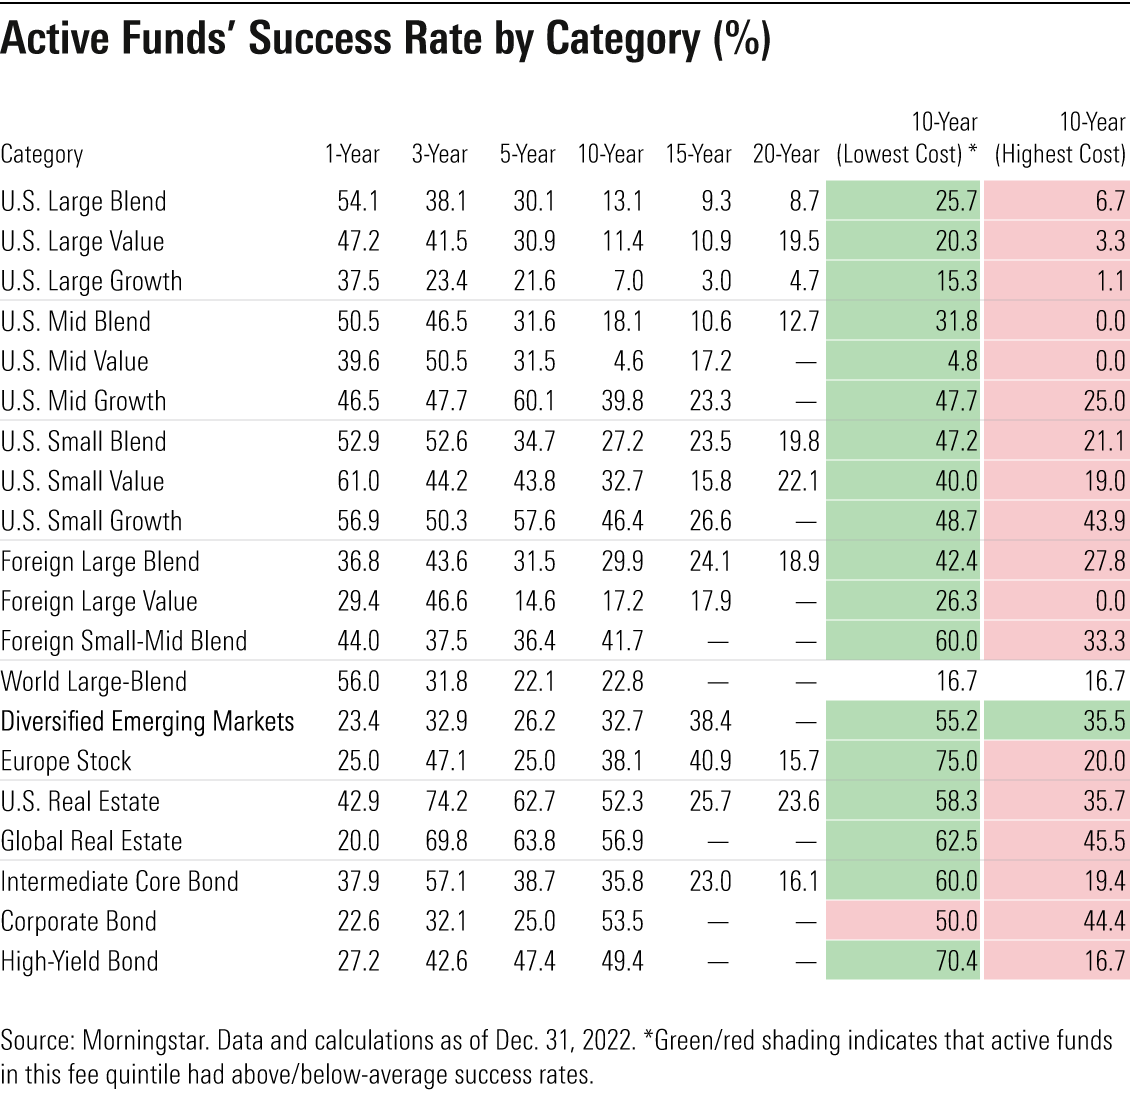 A table that details active funds' success rate by category over one-, three-, five-, 10-, 15-, and 20-year time horizons.